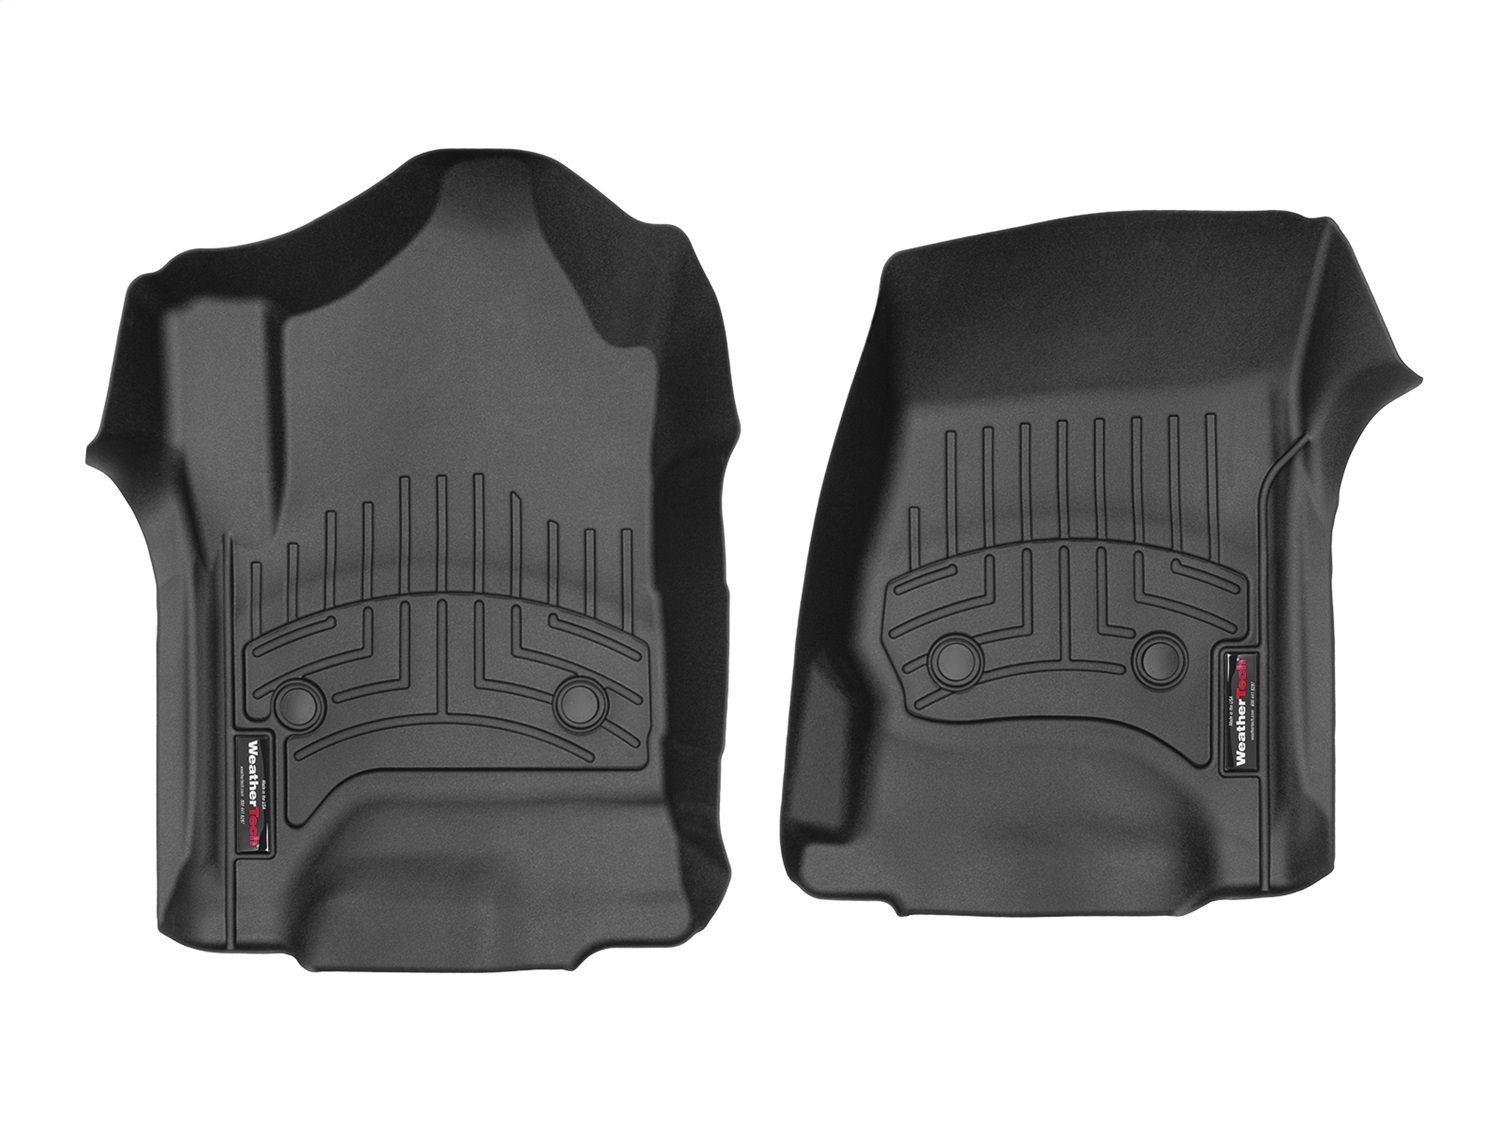 FRONT FLOORLINER BLACK CHEVROLET SILVERADO 1500 2014-2017 FITS VEHICLES WITH THE FLOOR-MOUNTED SHIFT